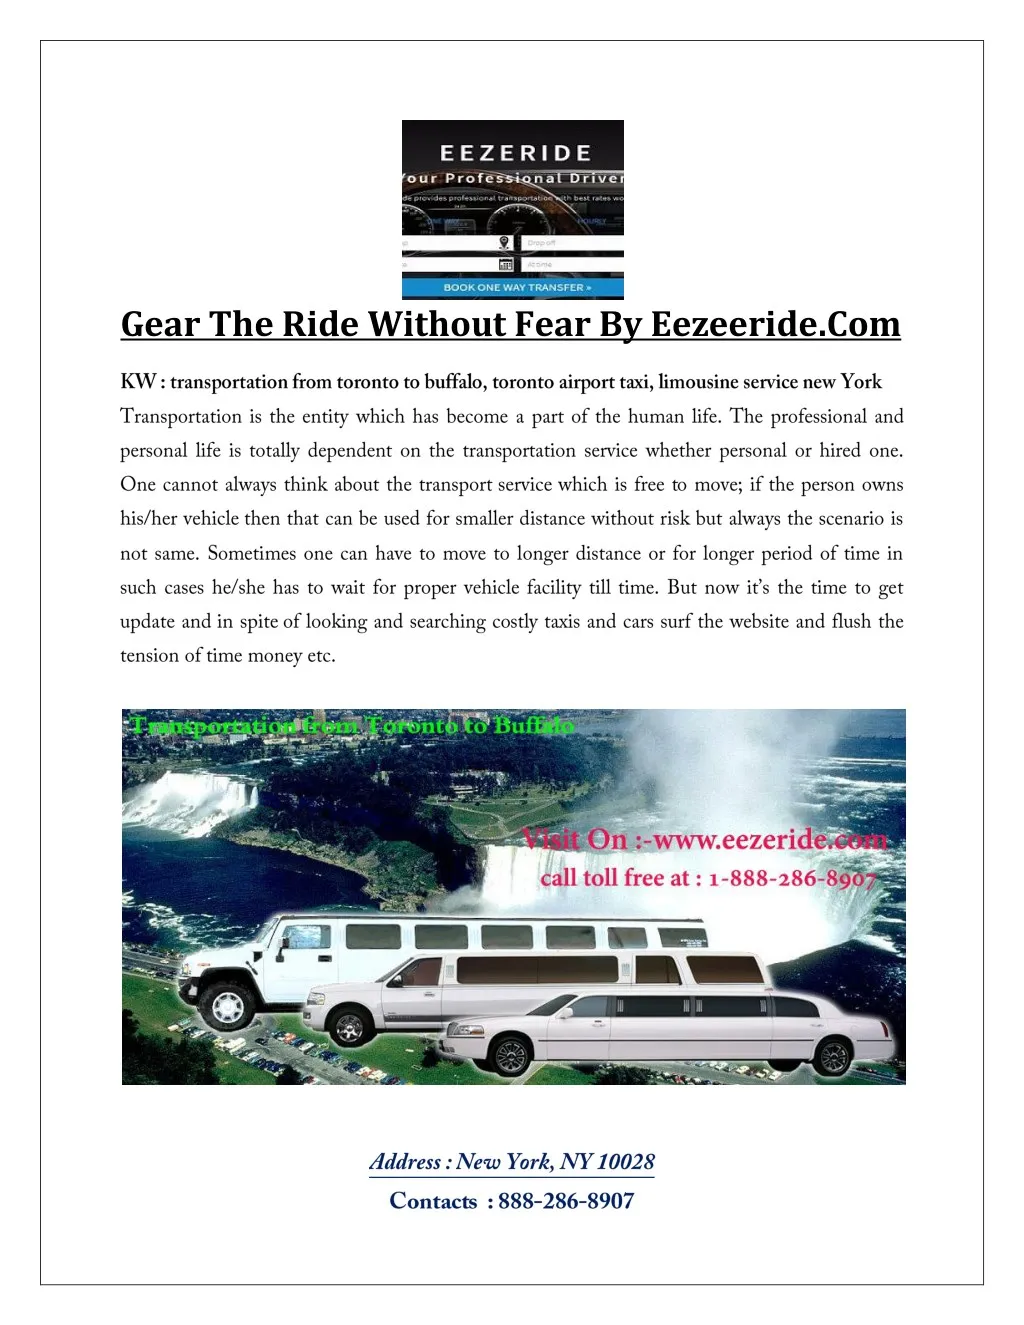 gear the ride without fear by eezeeride com